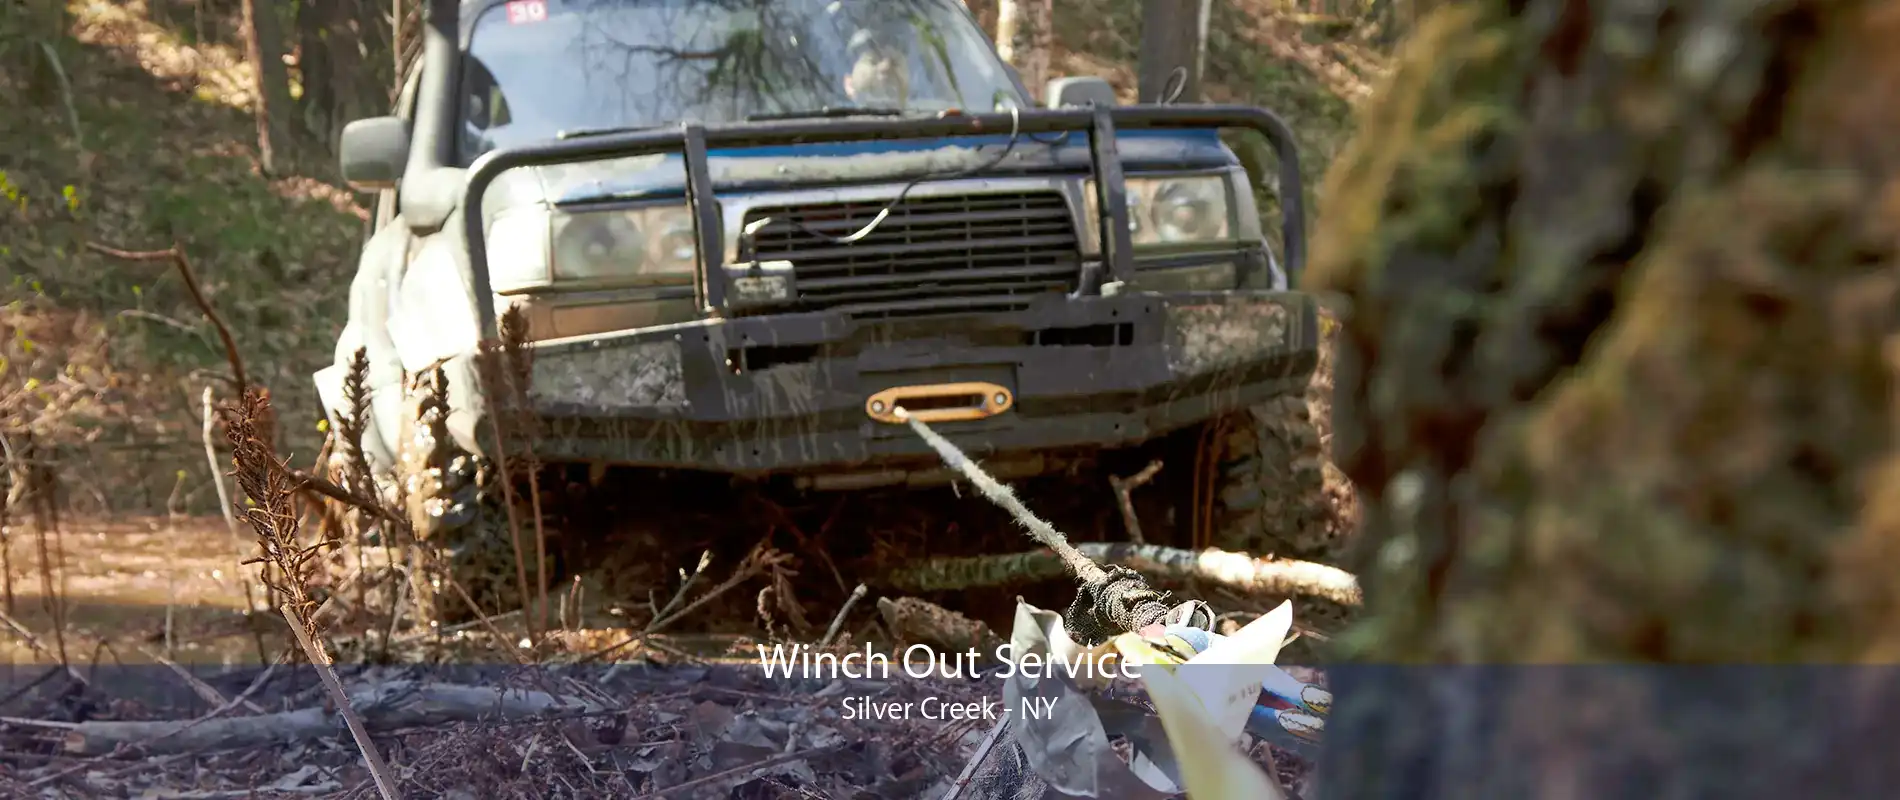 Winch Out Service Silver Creek - NY